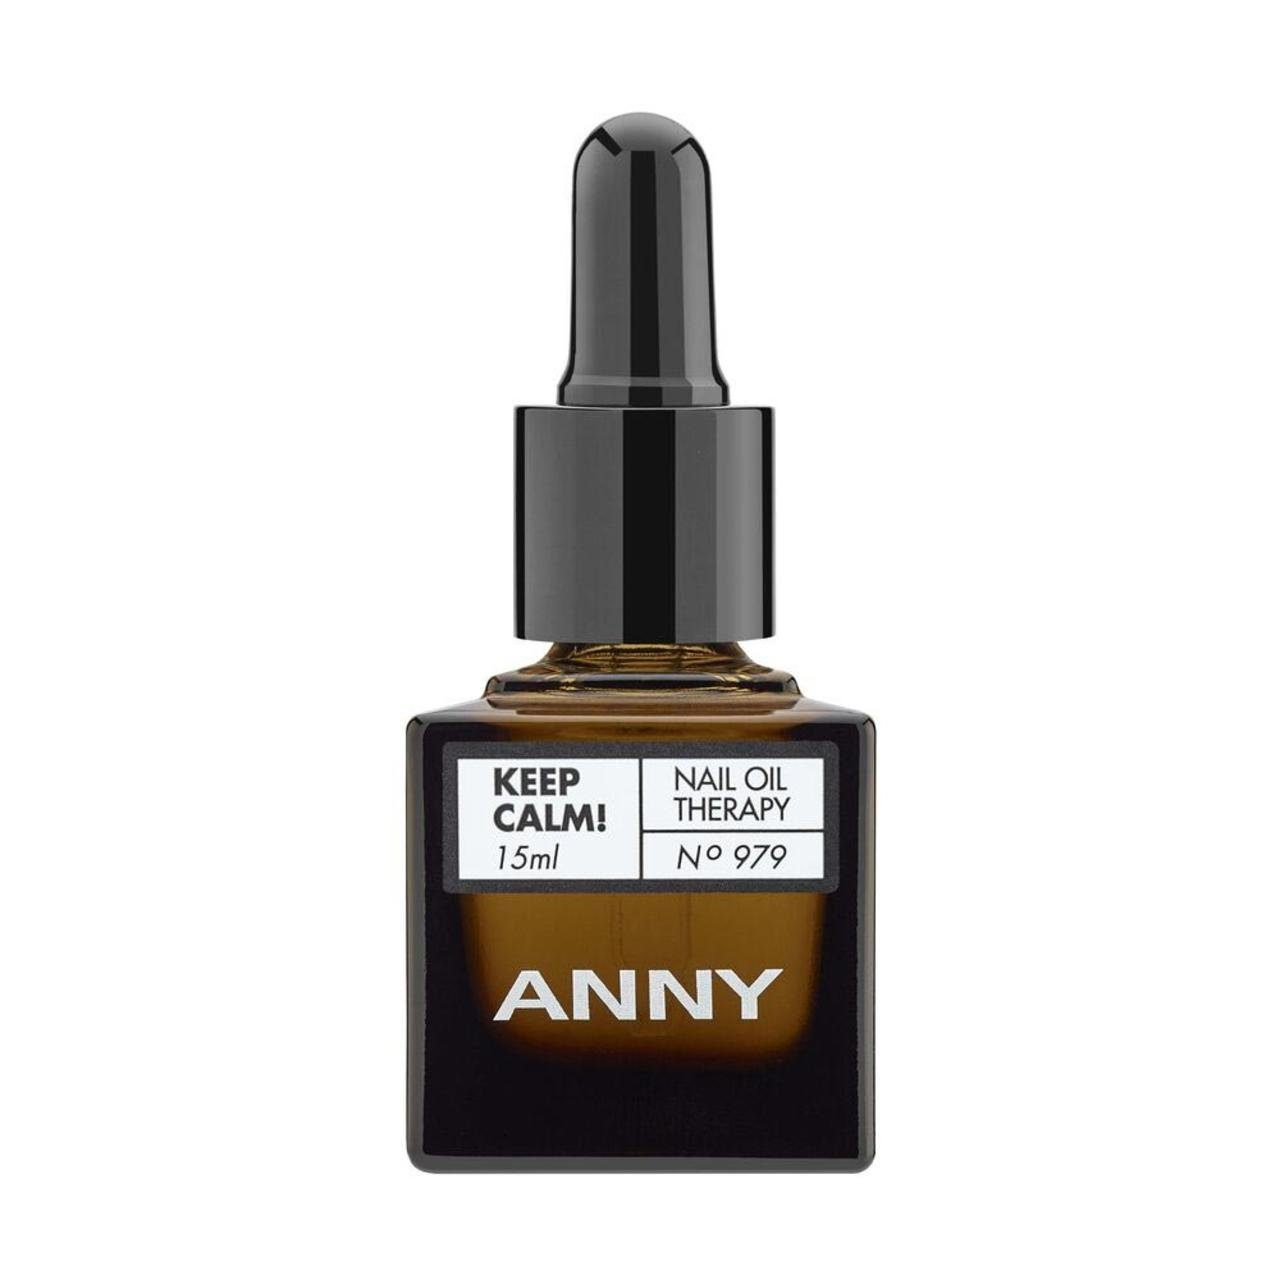 ANNY Nagelpflegeöl Keep Calm! Nail Oil Therapy